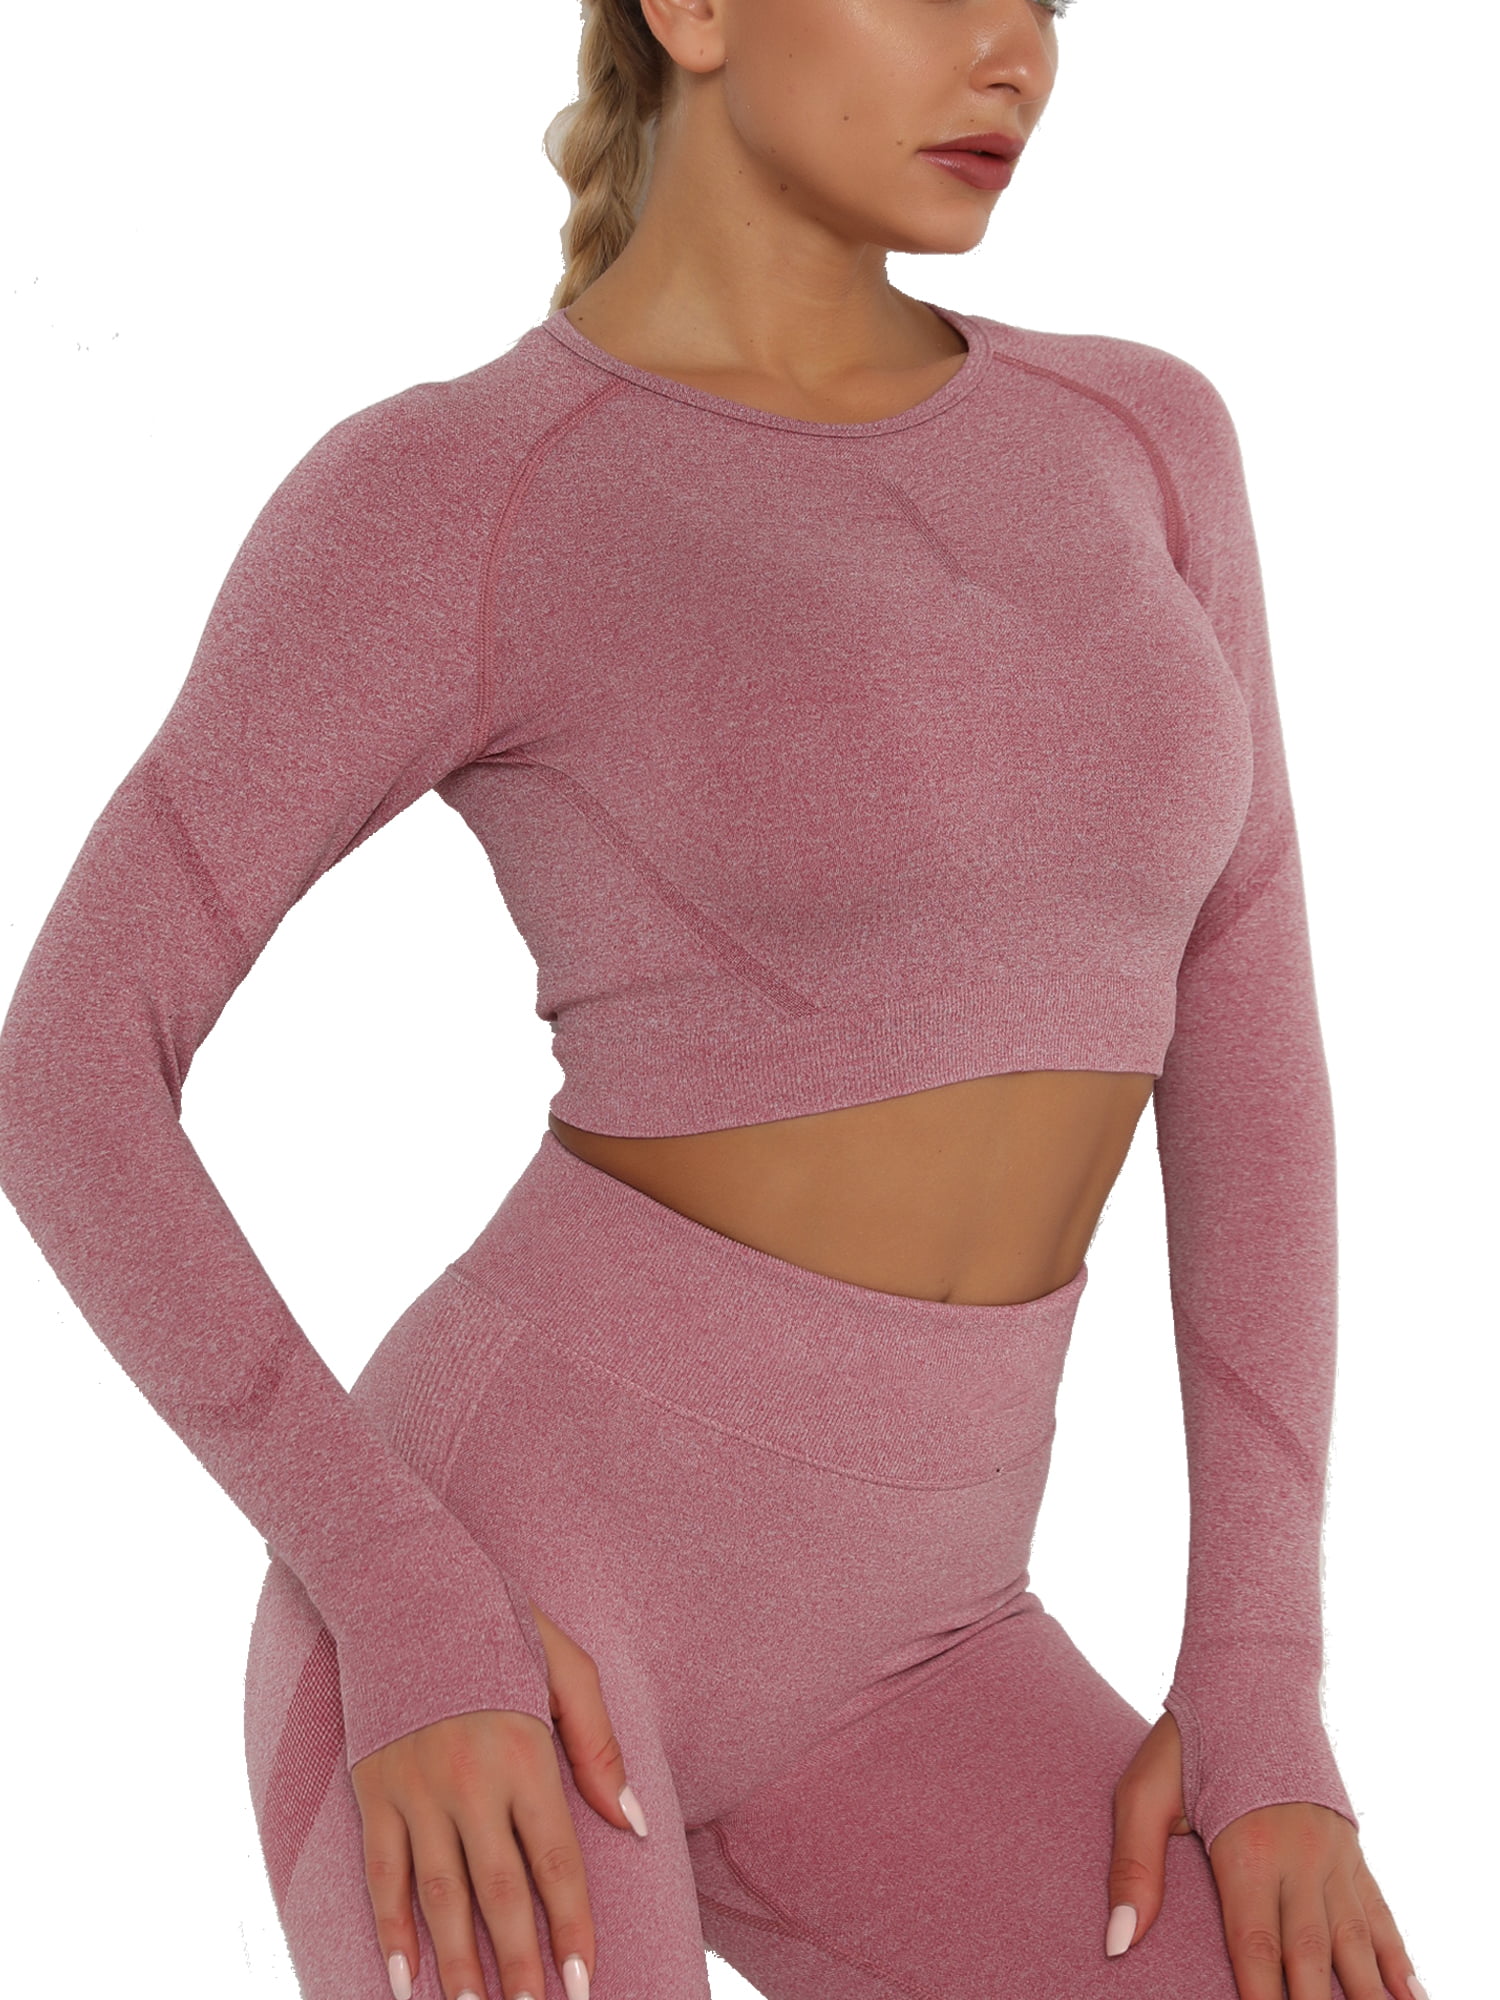 Womens Yoga Gym Crop Top Seamless Compression Long Sleeve Workout Athletic Shirt 